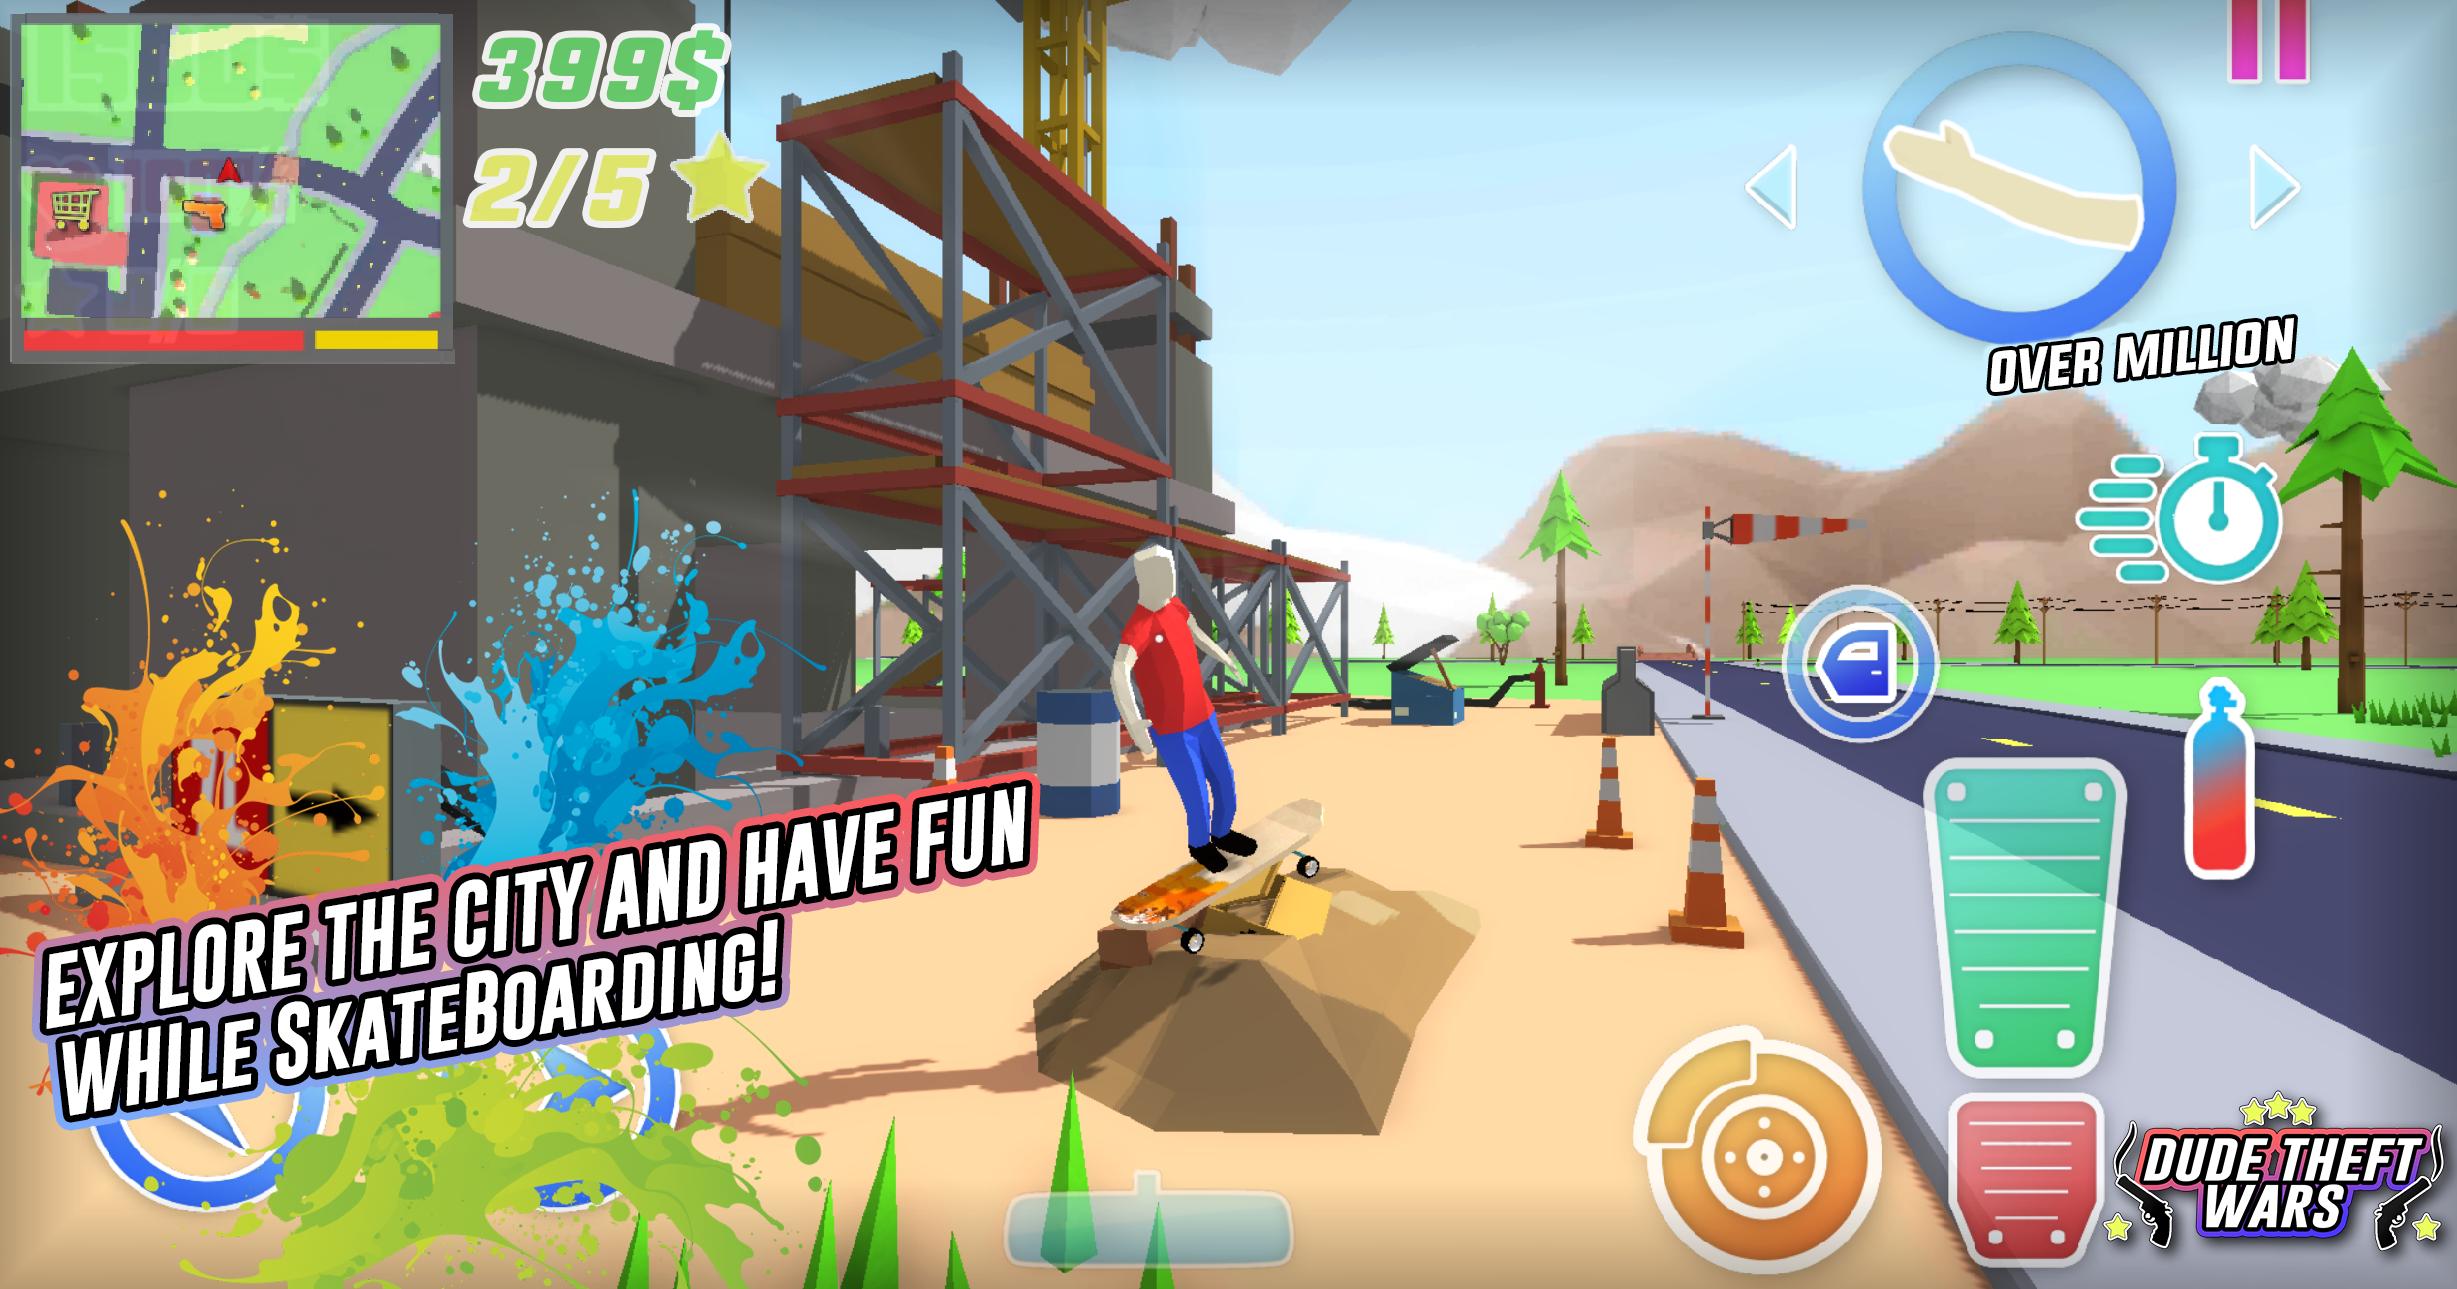 Dude Theft Wars For Android Apk Download - roblox craftwars epic katana